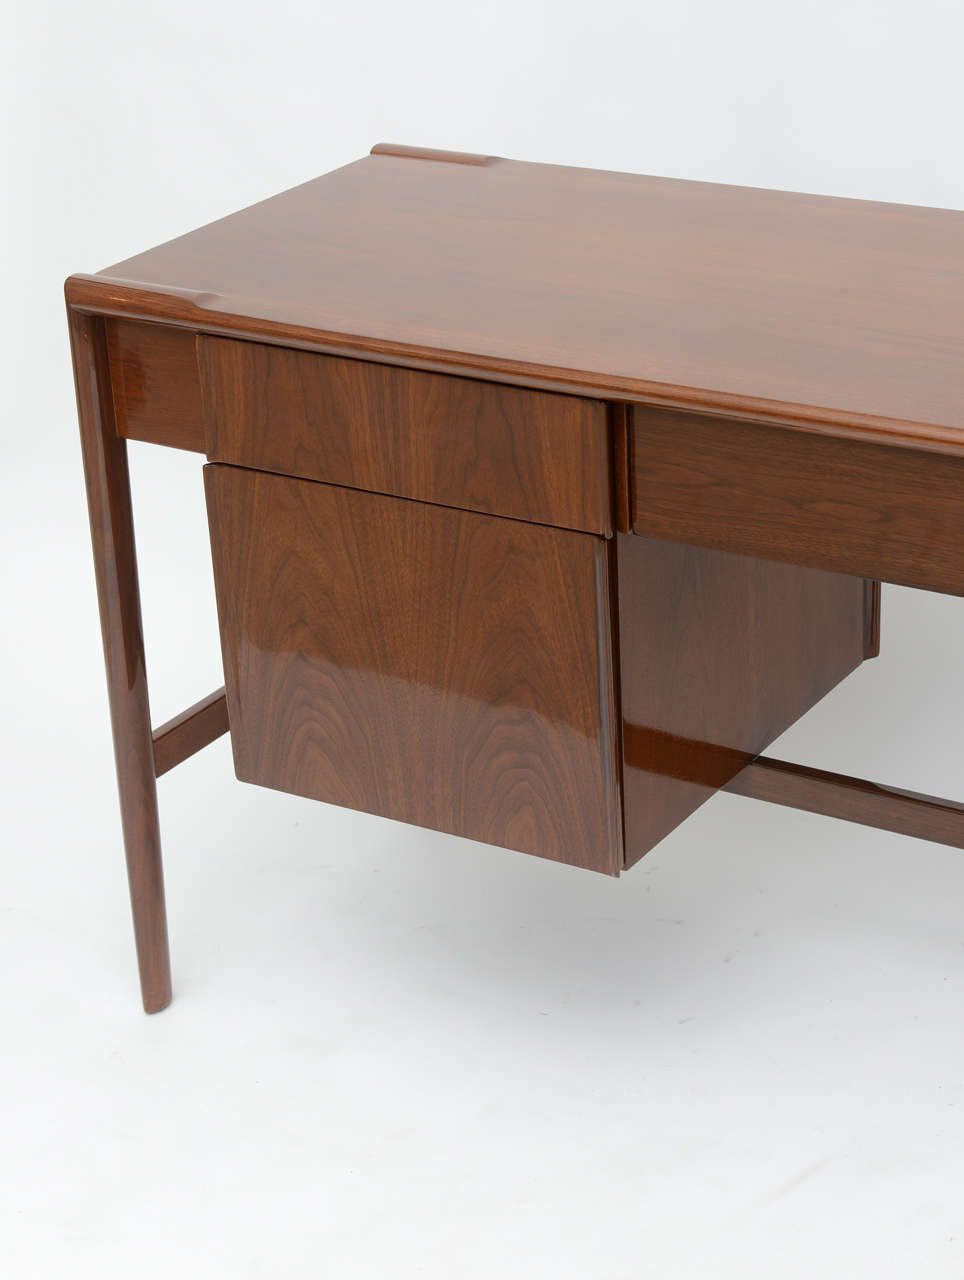 American Modern Walnut Desk In Excellent Condition For Sale In Hollywood, FL